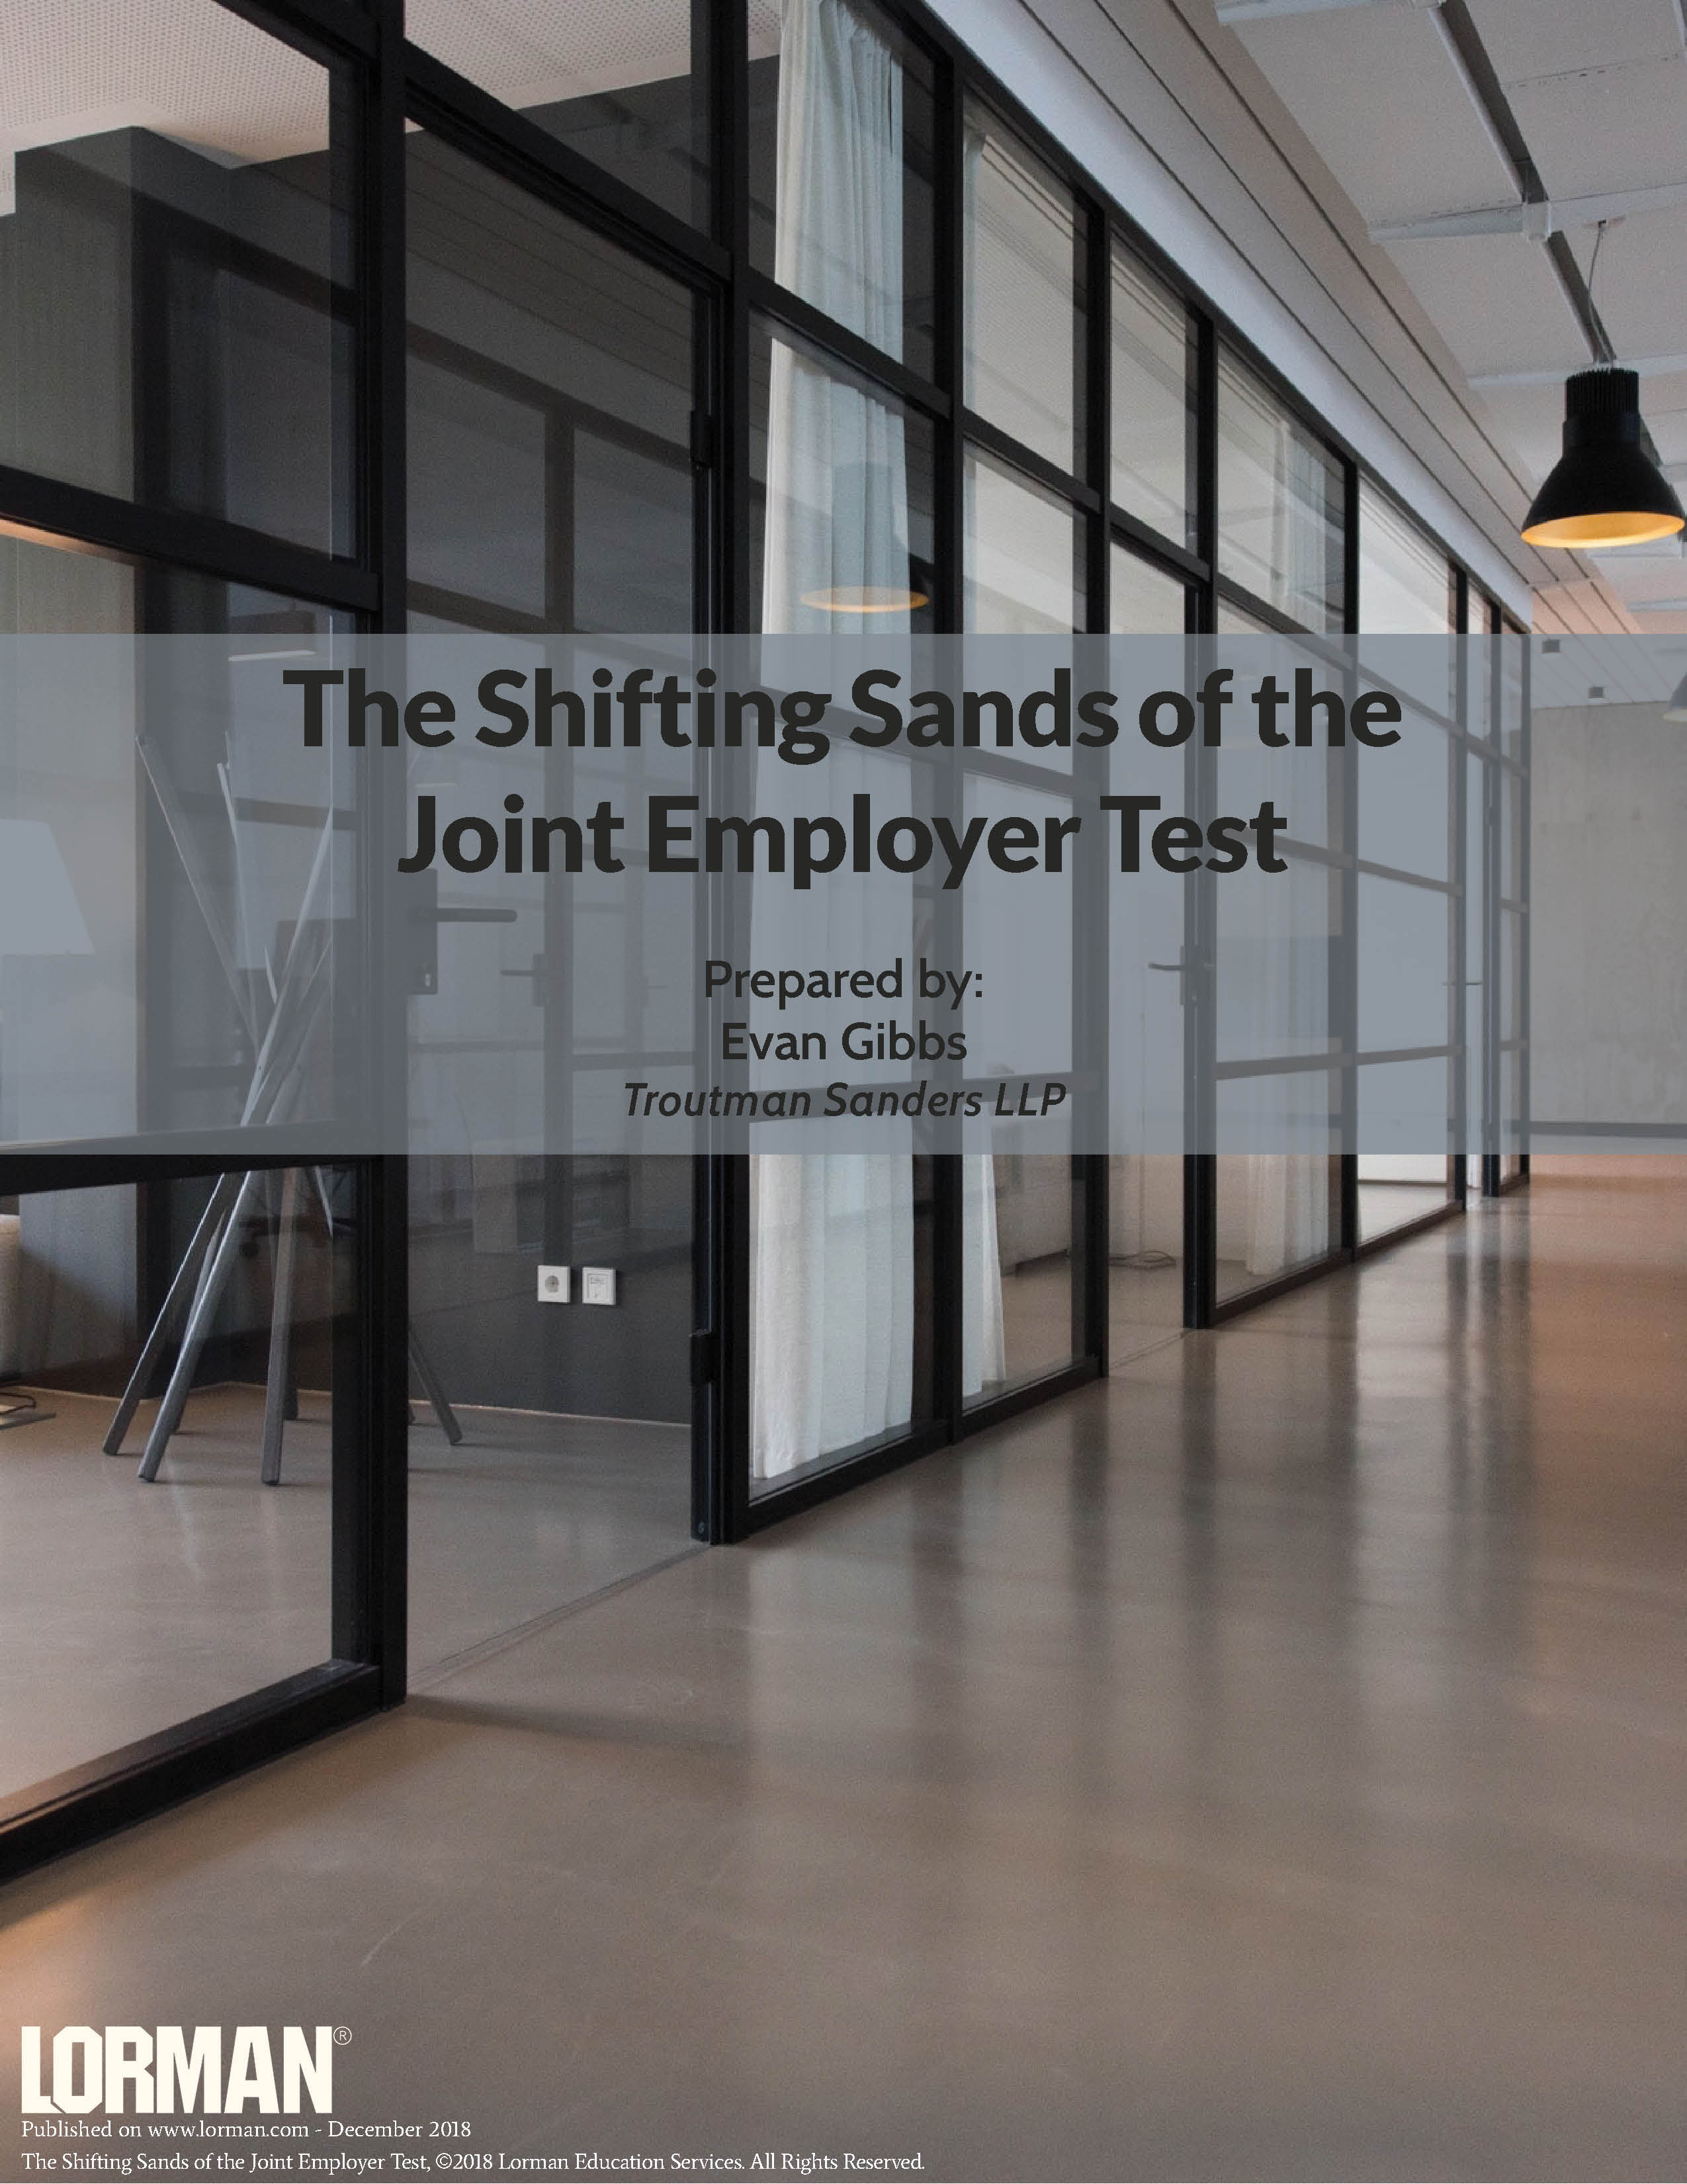 The Shifting Sands of the Joint Employer Test